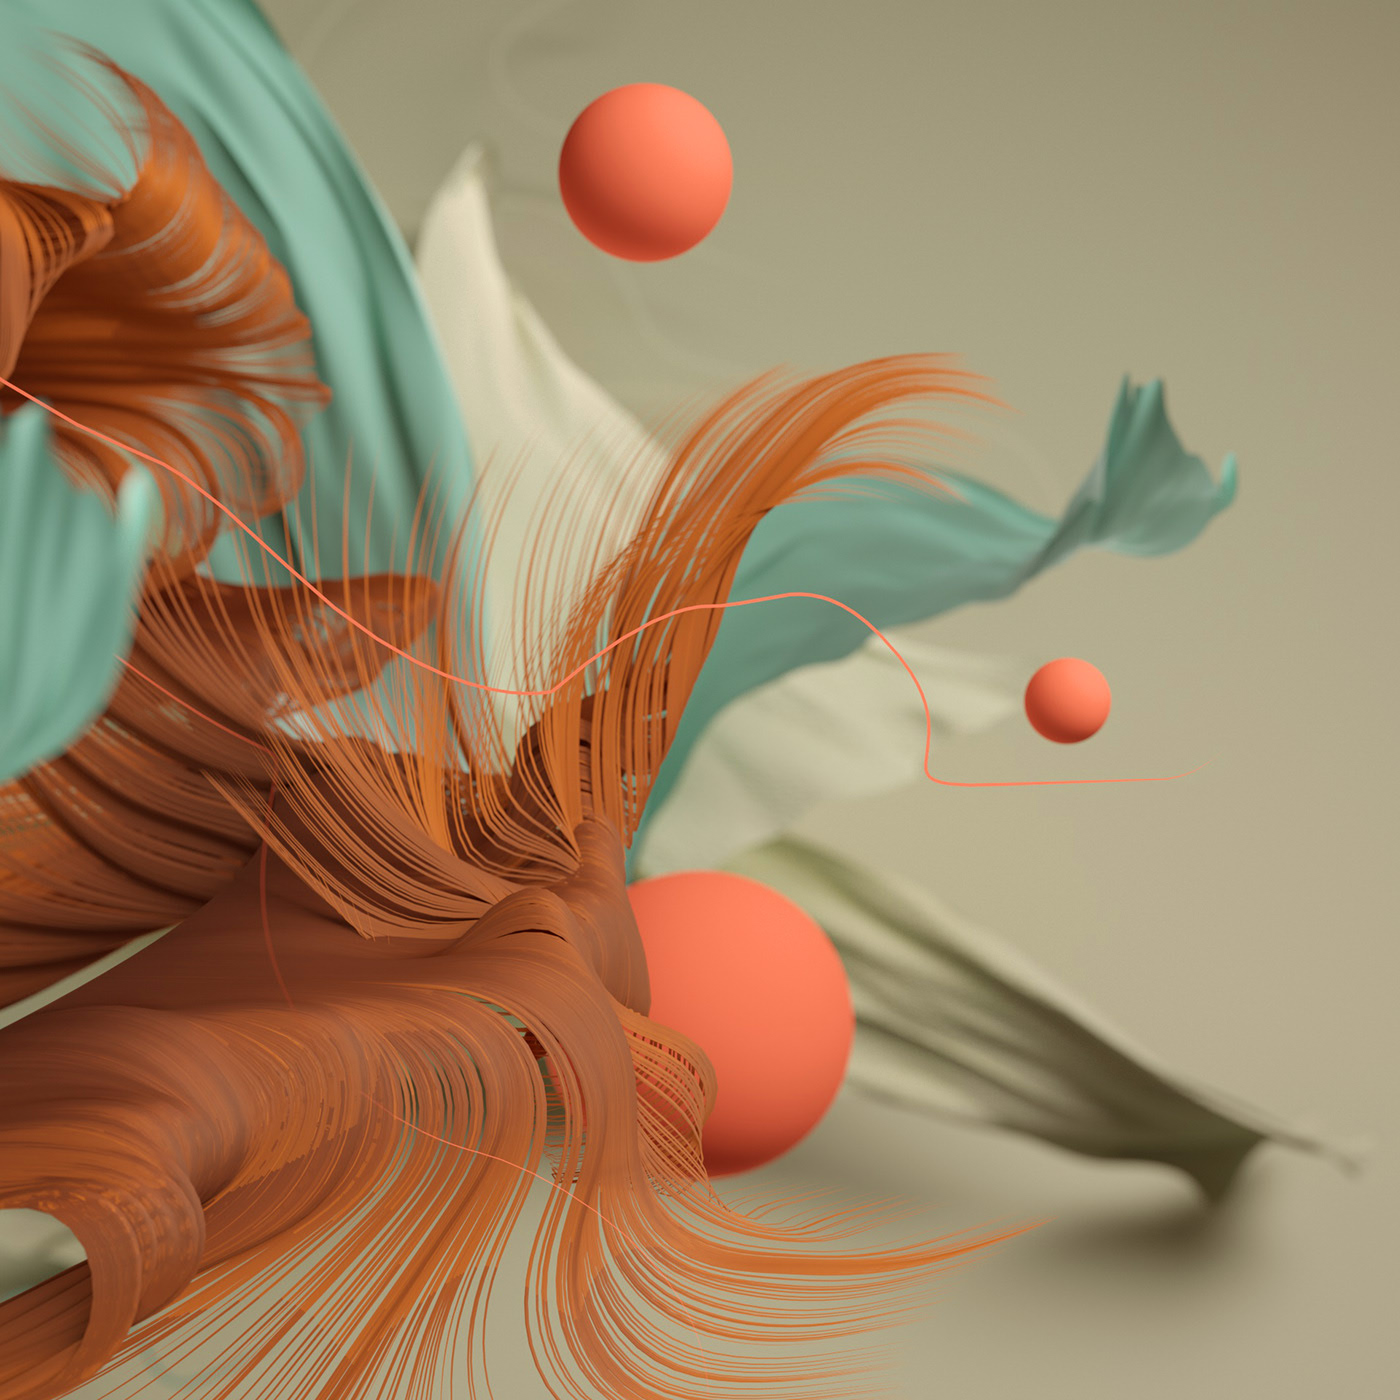 Hair and displacement exploration on Behance1e8af492696451.5e51de0f59a14.jpg